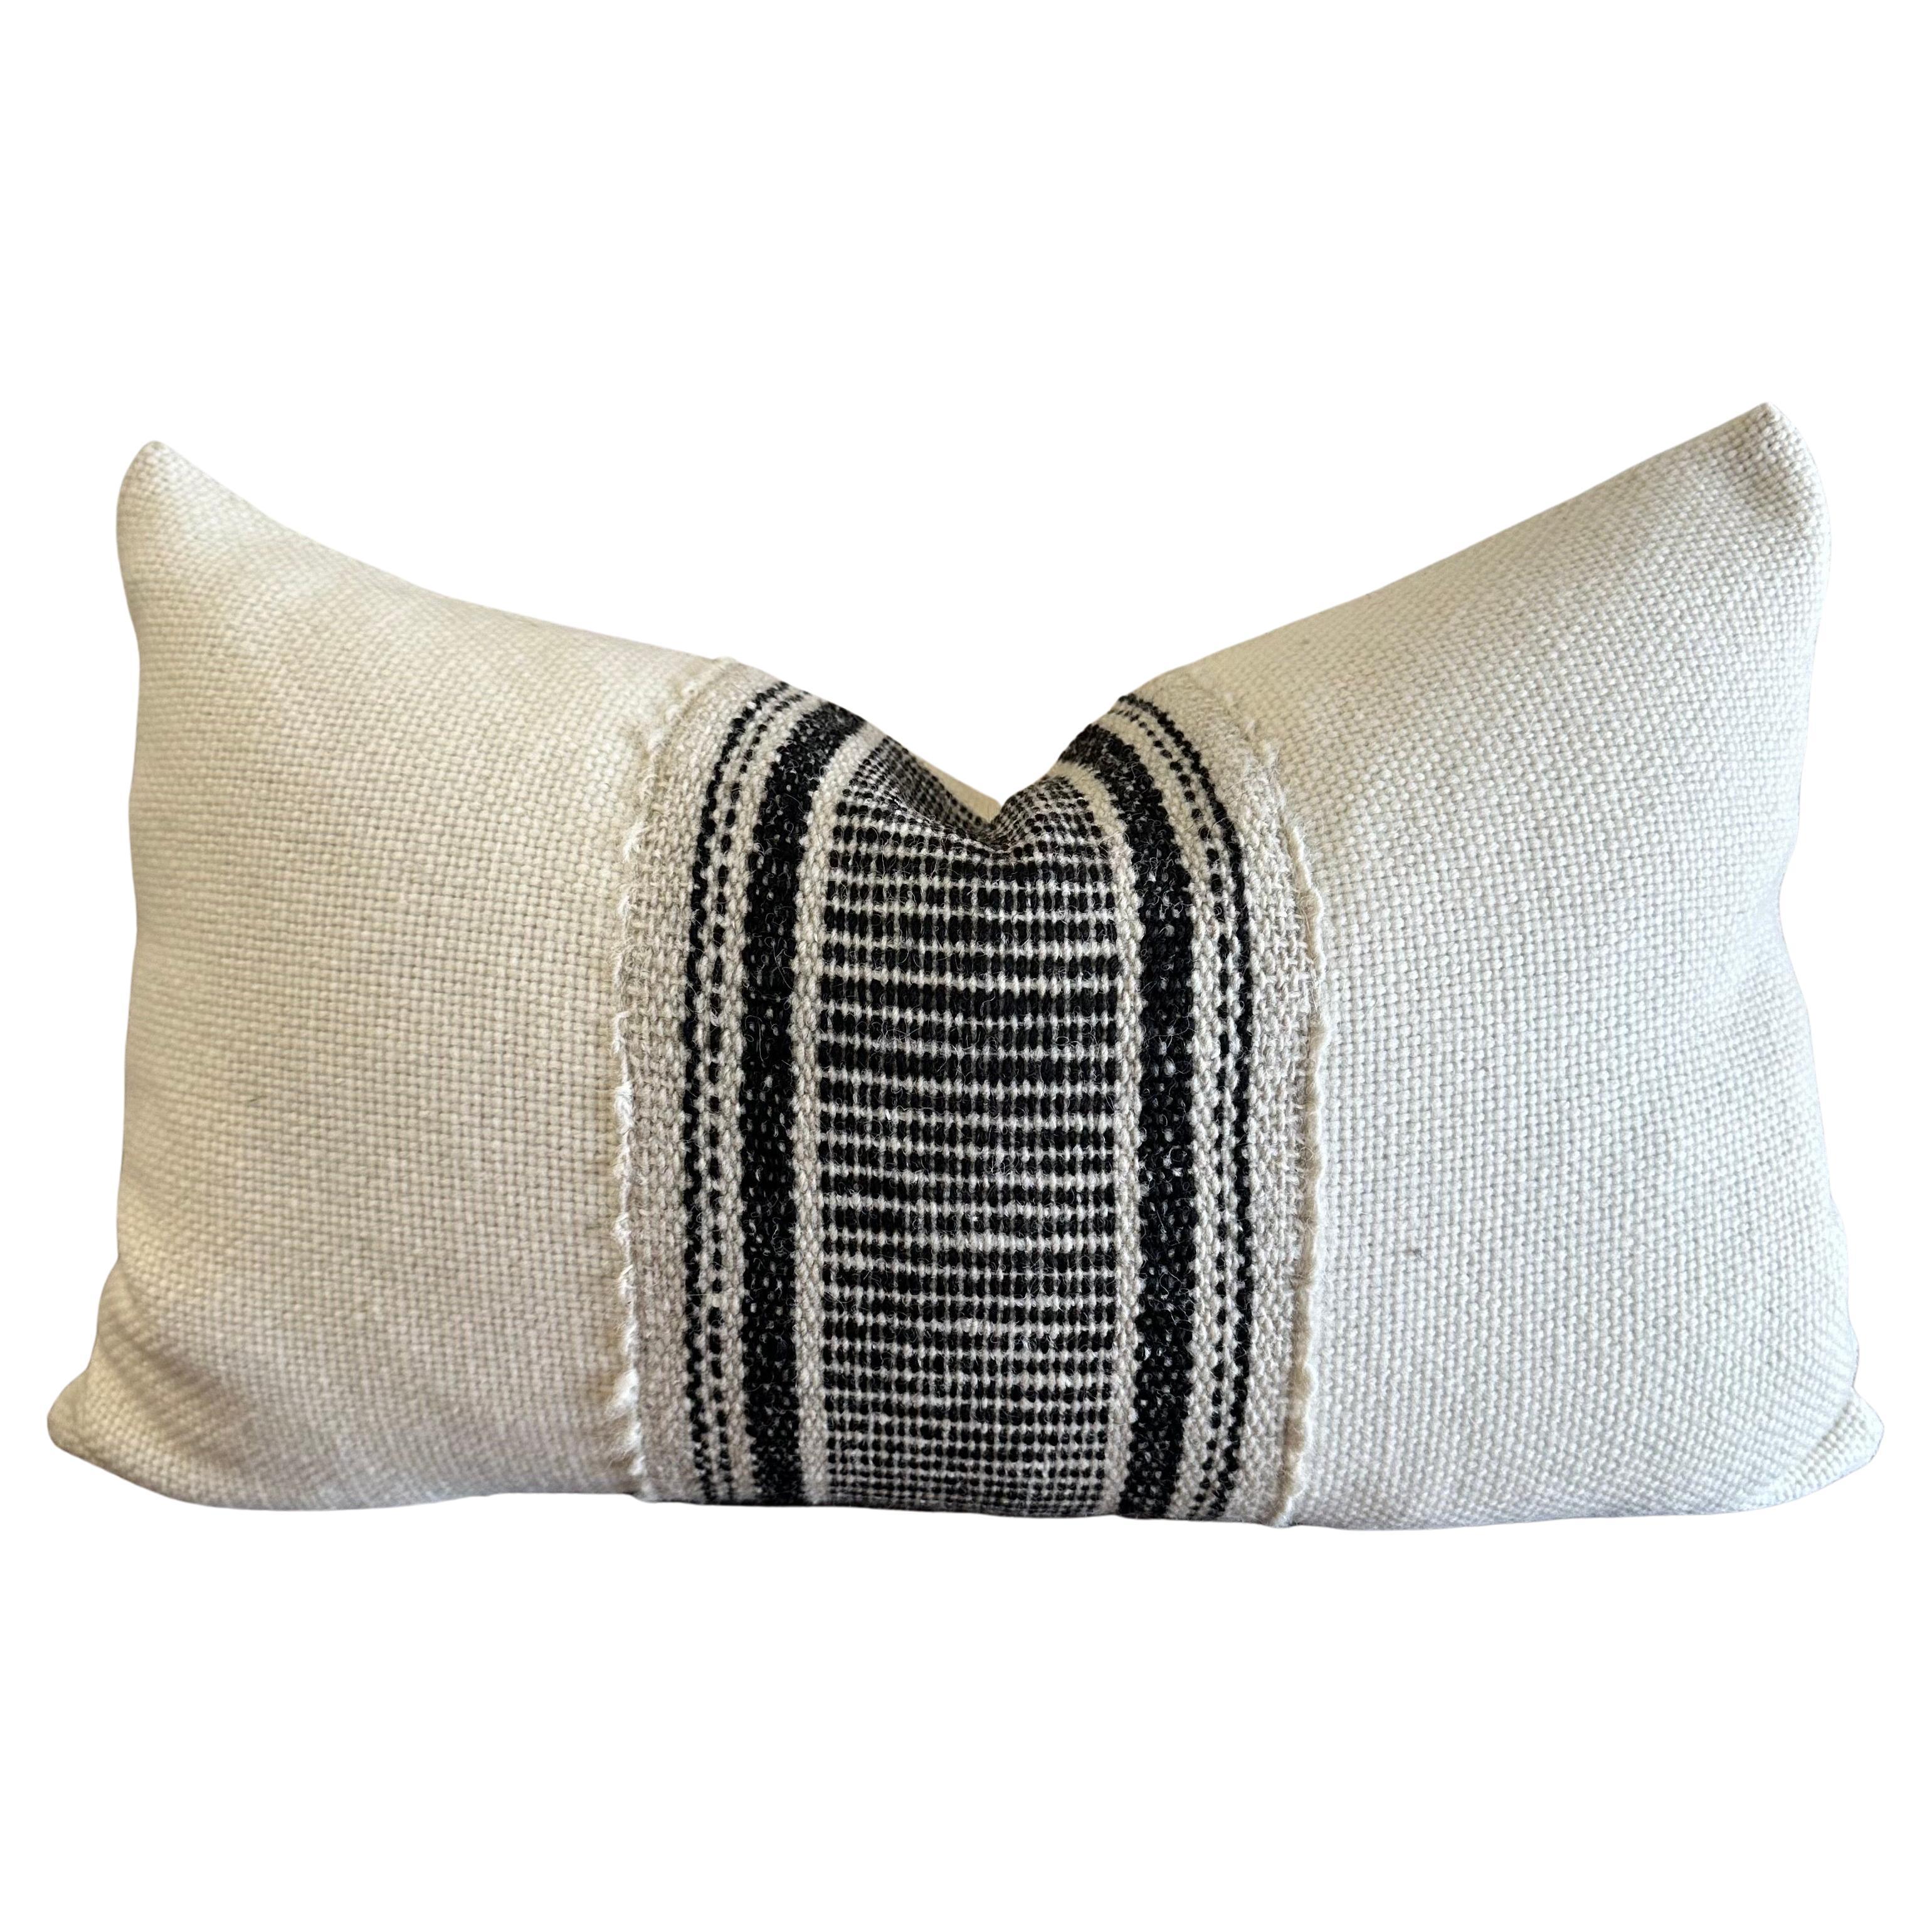 Custom Handmade Wool Pillow with Black Stripes Includes Down Feather Insert For Sale